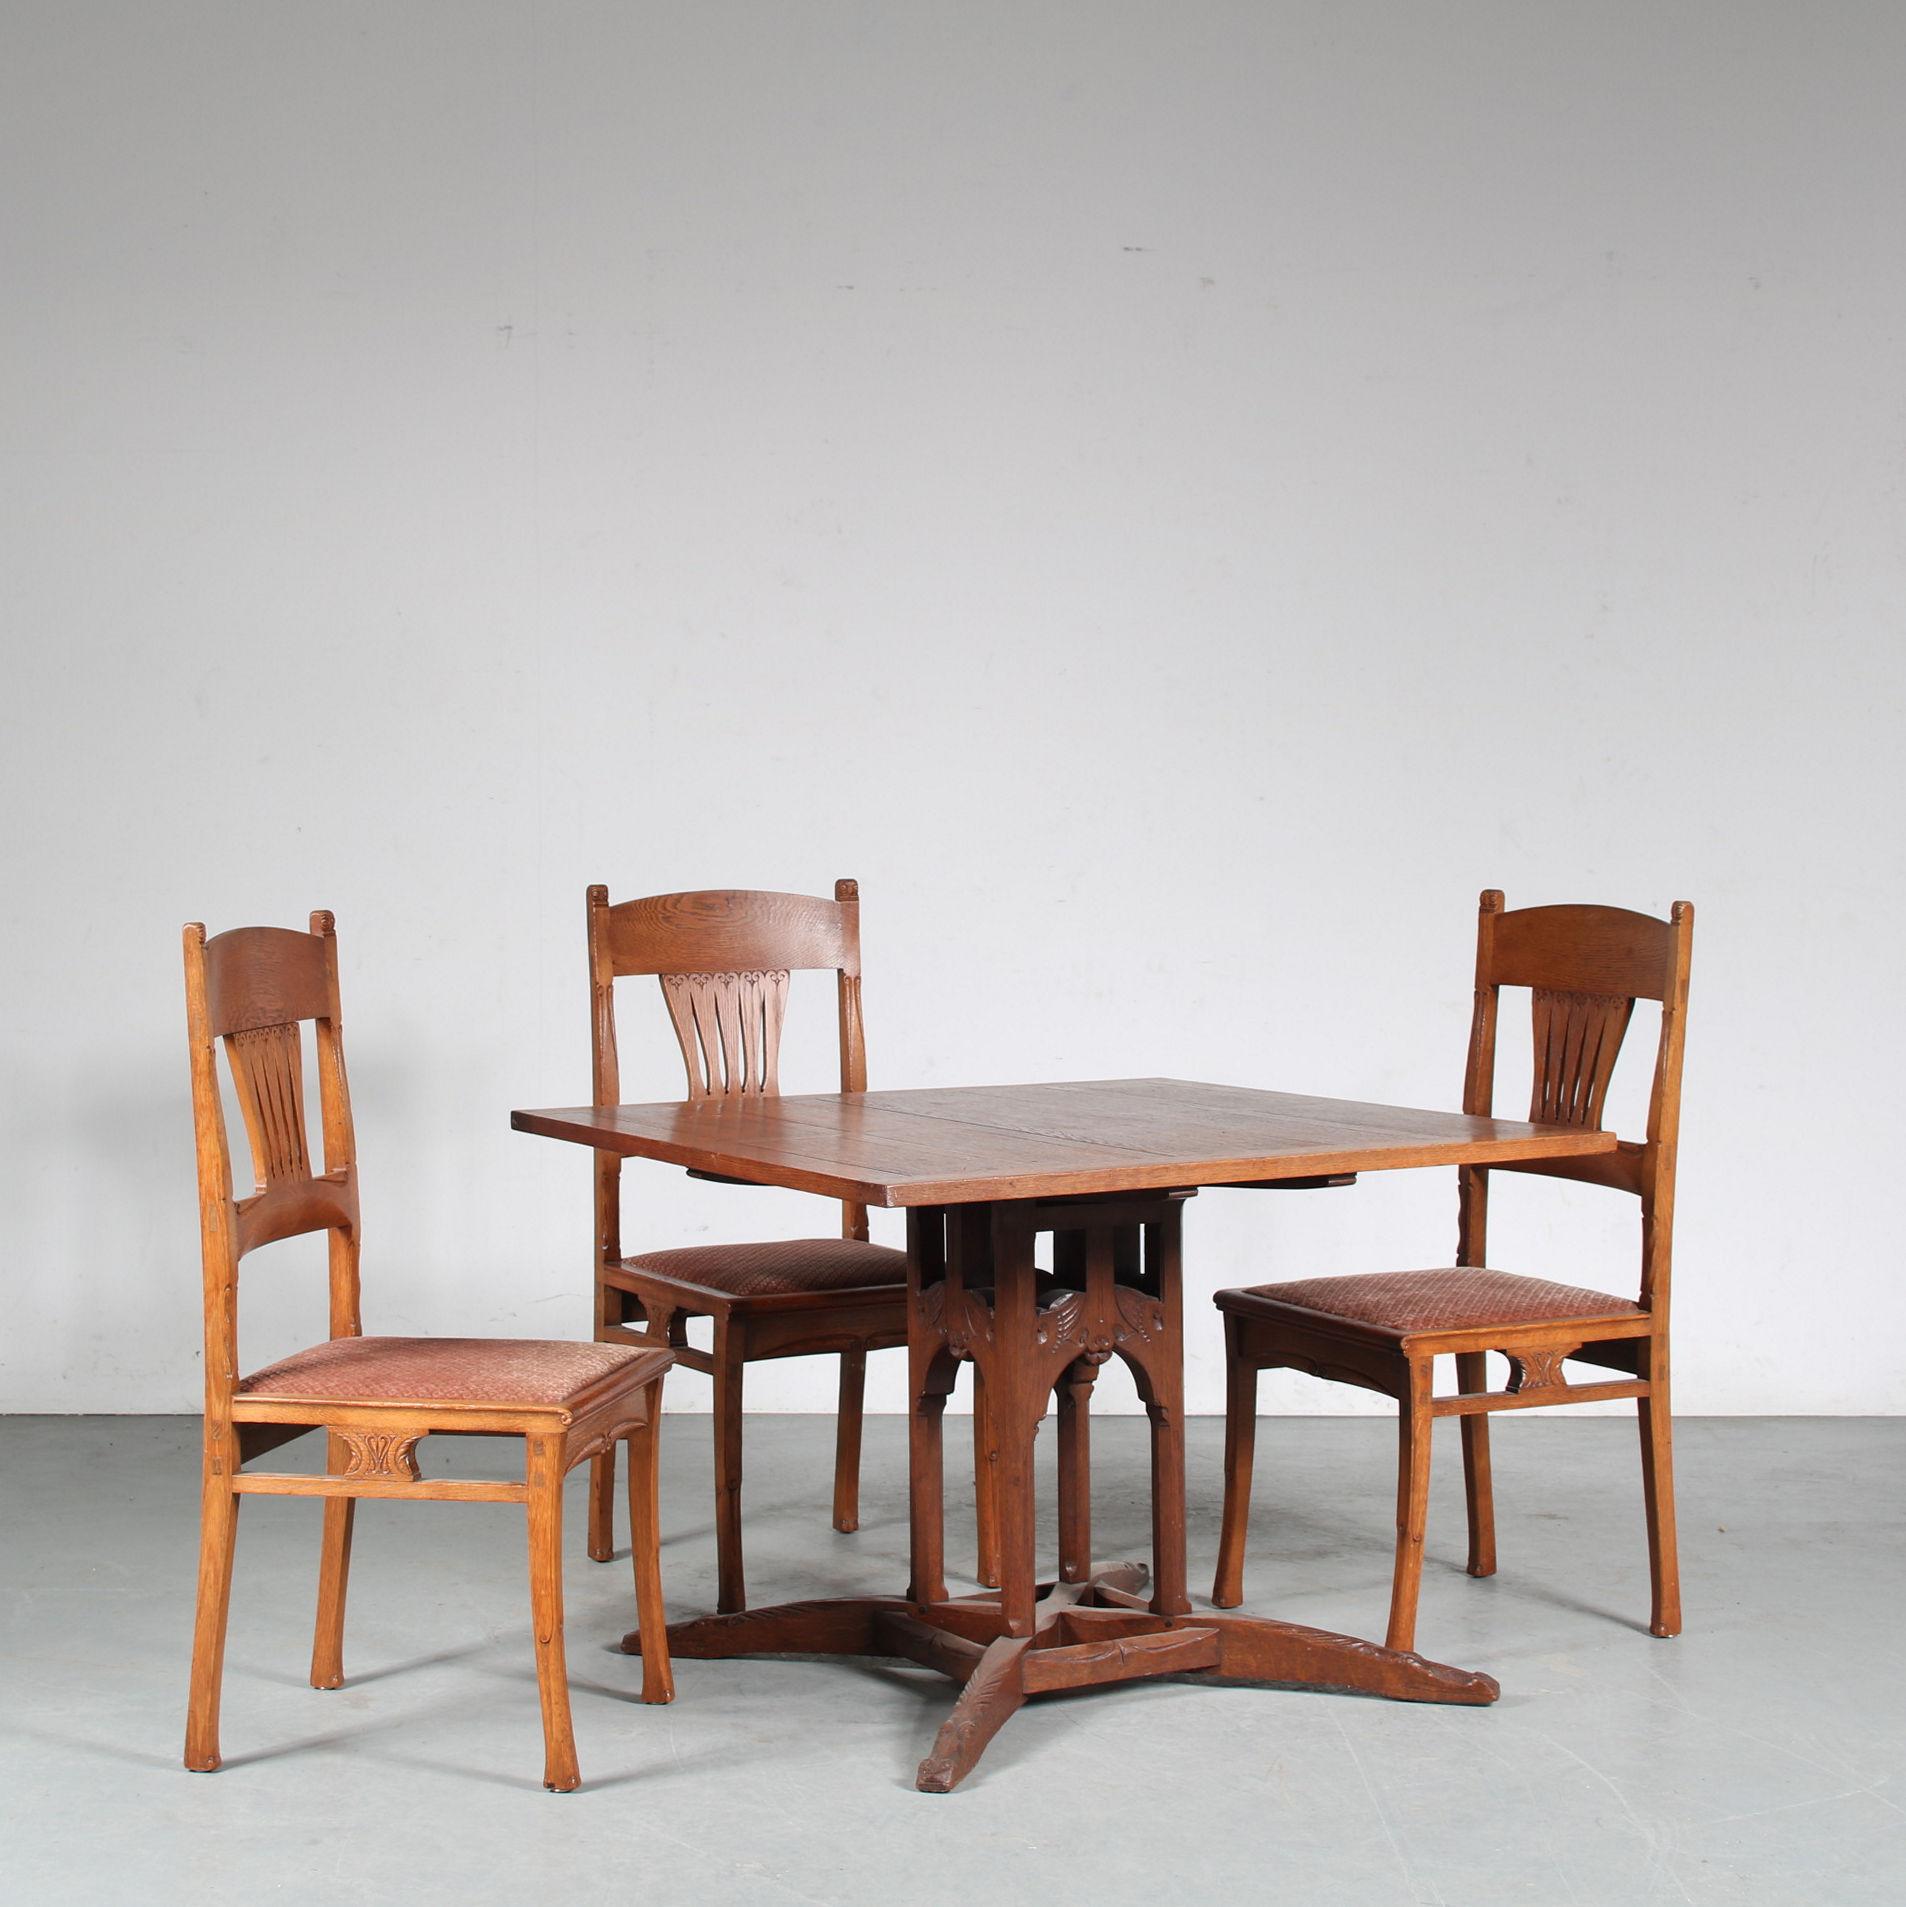 Dining Set by Gerrit Willem Dijsselhof for E.J. Van Wisselingh, the Netherlands In Good Condition For Sale In Amsterdam, NL